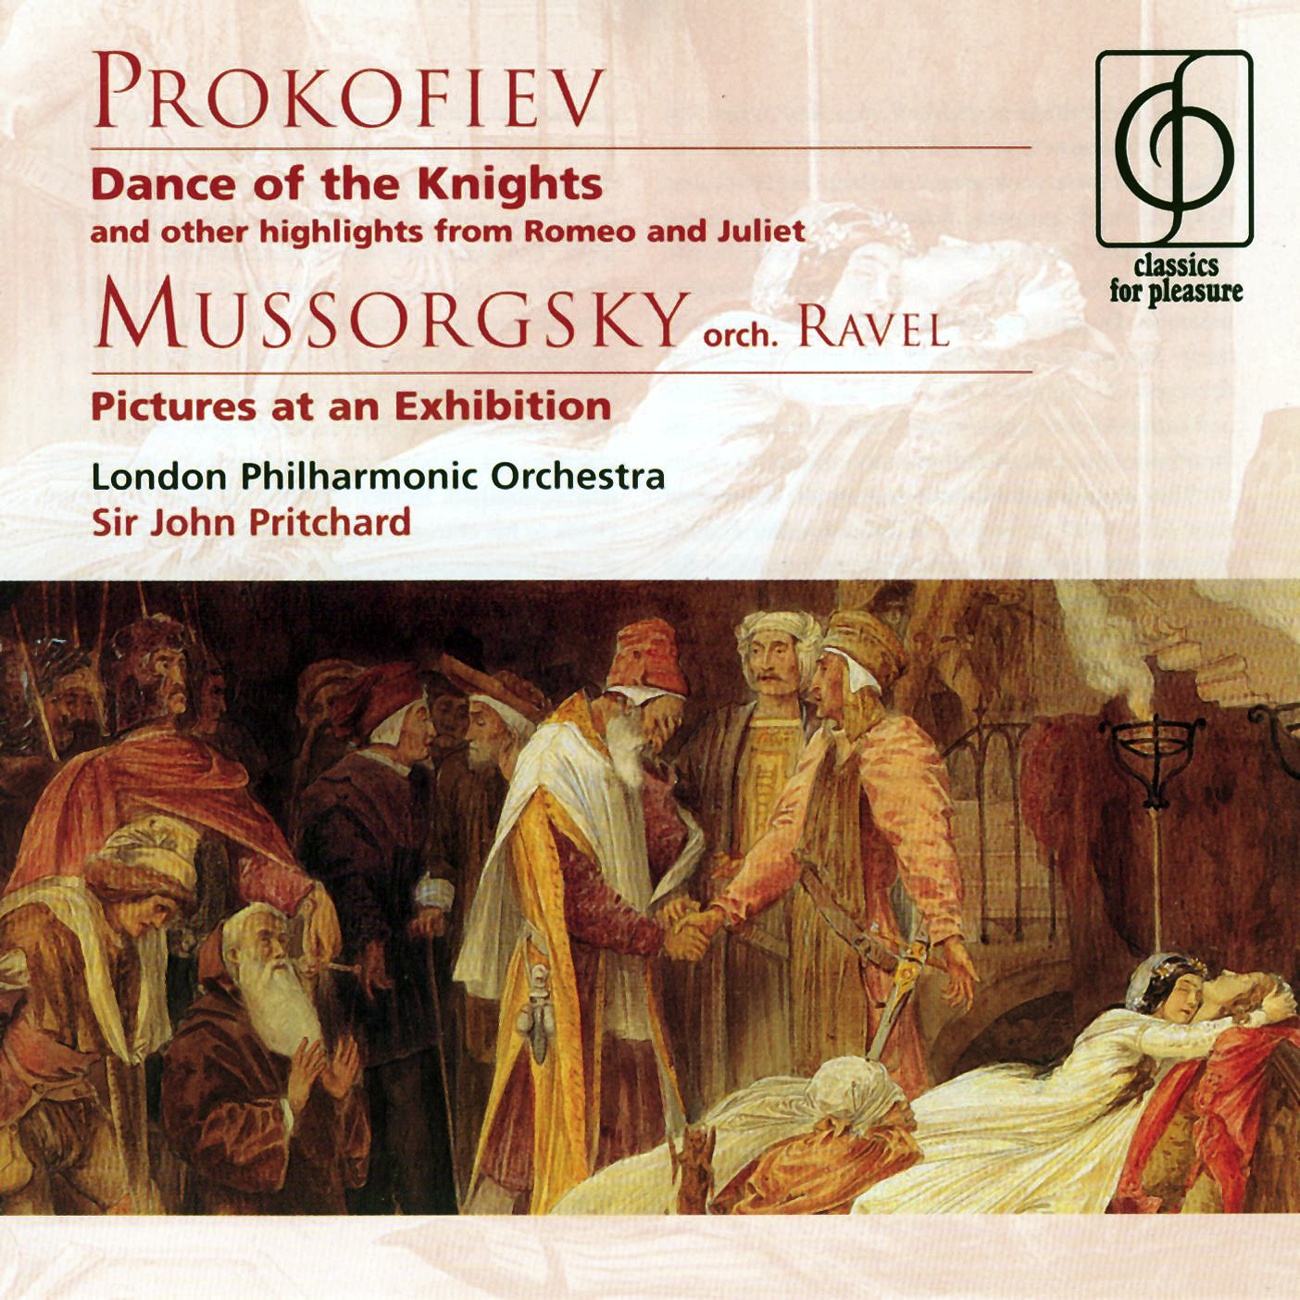 Pictures at an Exhibition (orch. Ravel) (1970 Digital Remaster): The Old Castle